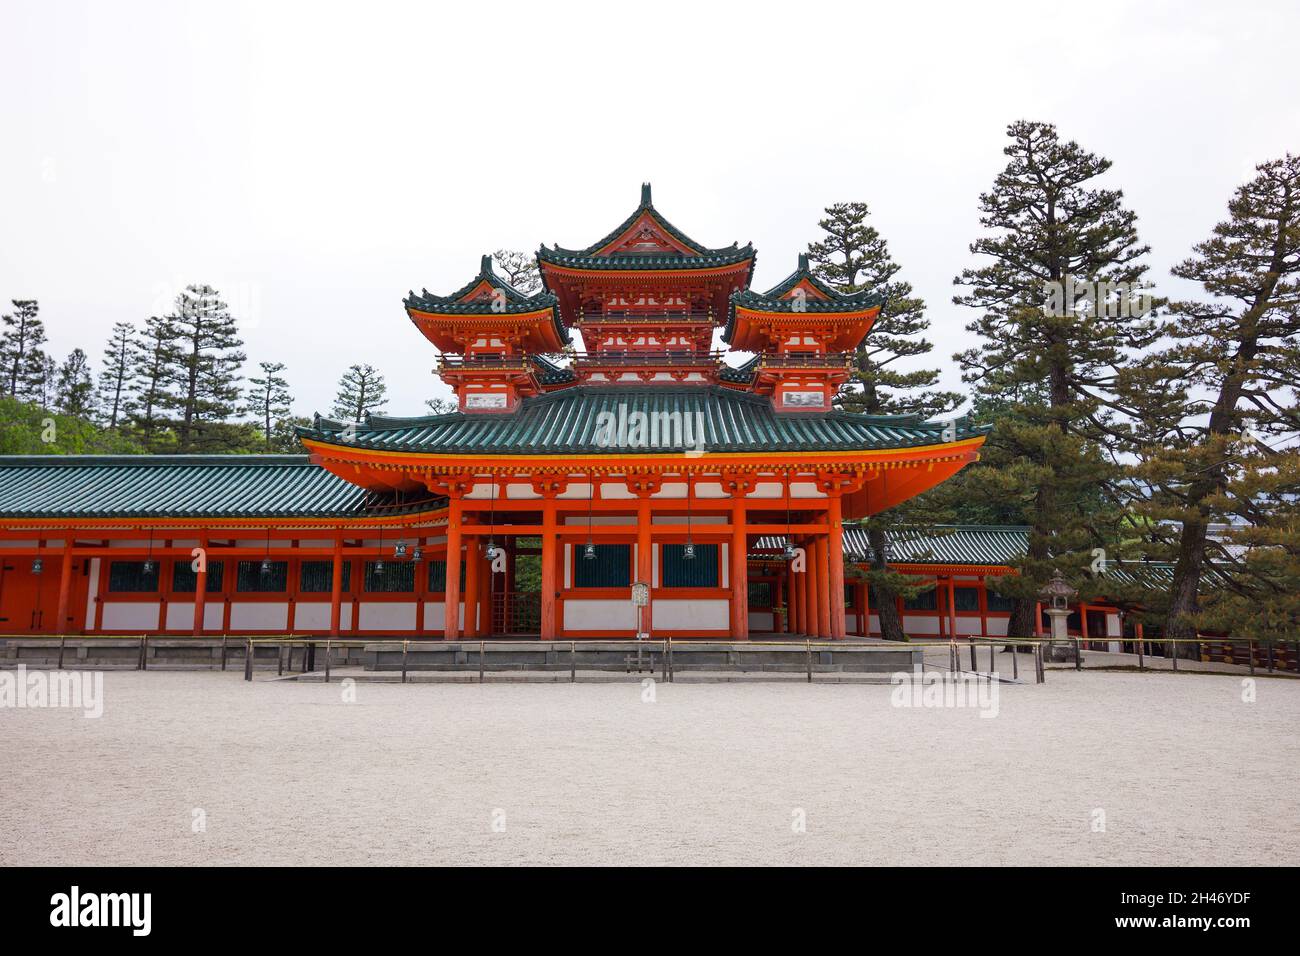 View of Souryu-rou Tower in the inner courtyard of Heian Shrine with trees and bright sky background. No people. Stock Photo